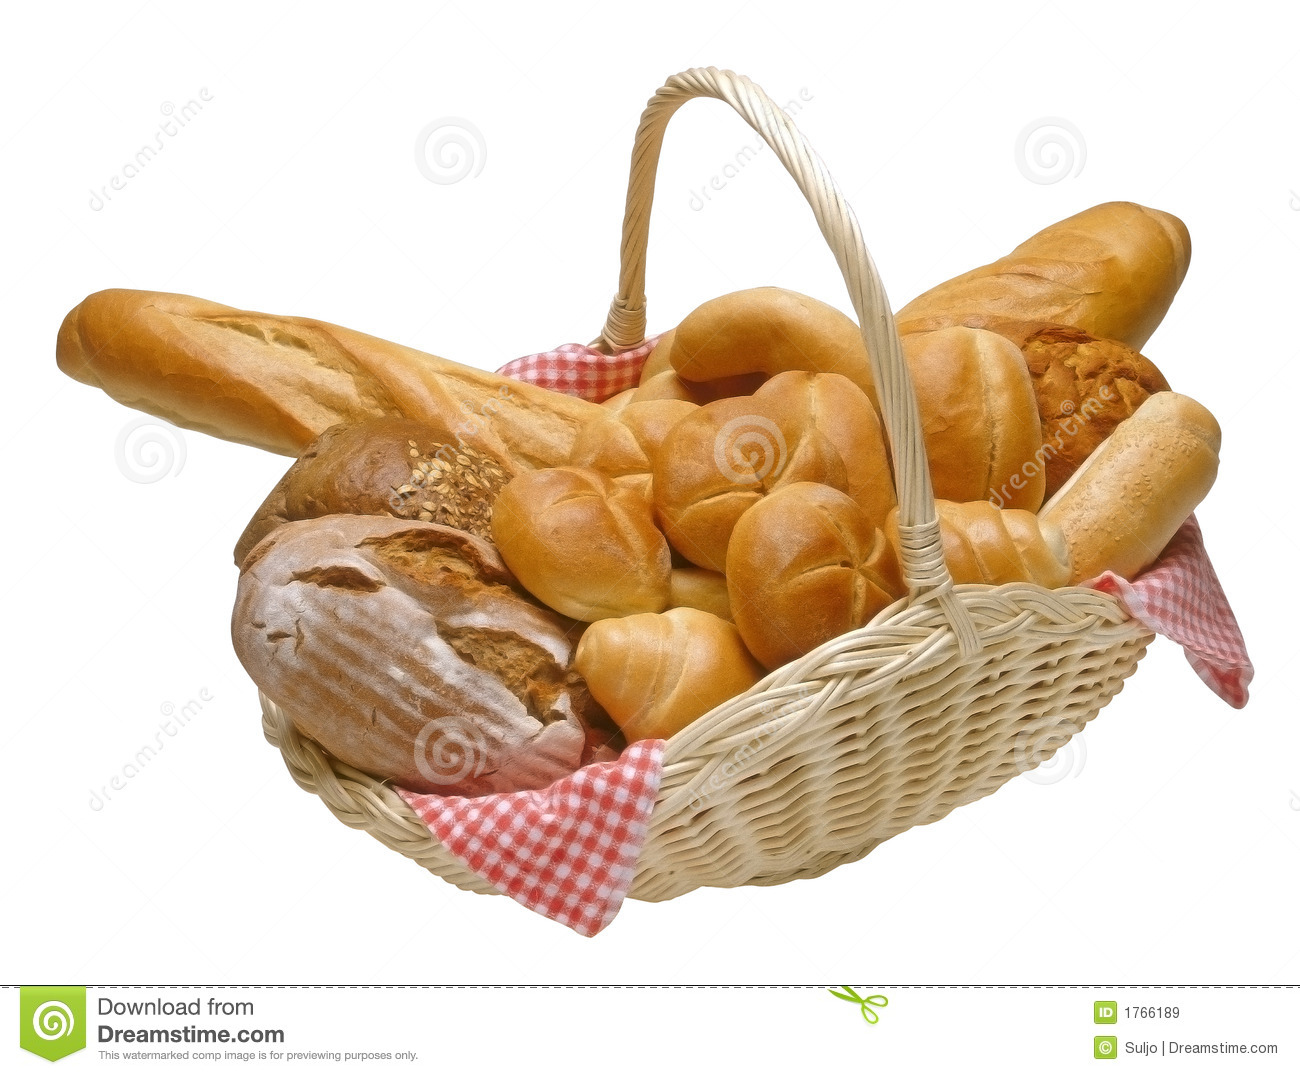 Breads And Rolls In A Wicker Basket Isolated With Clipping Path